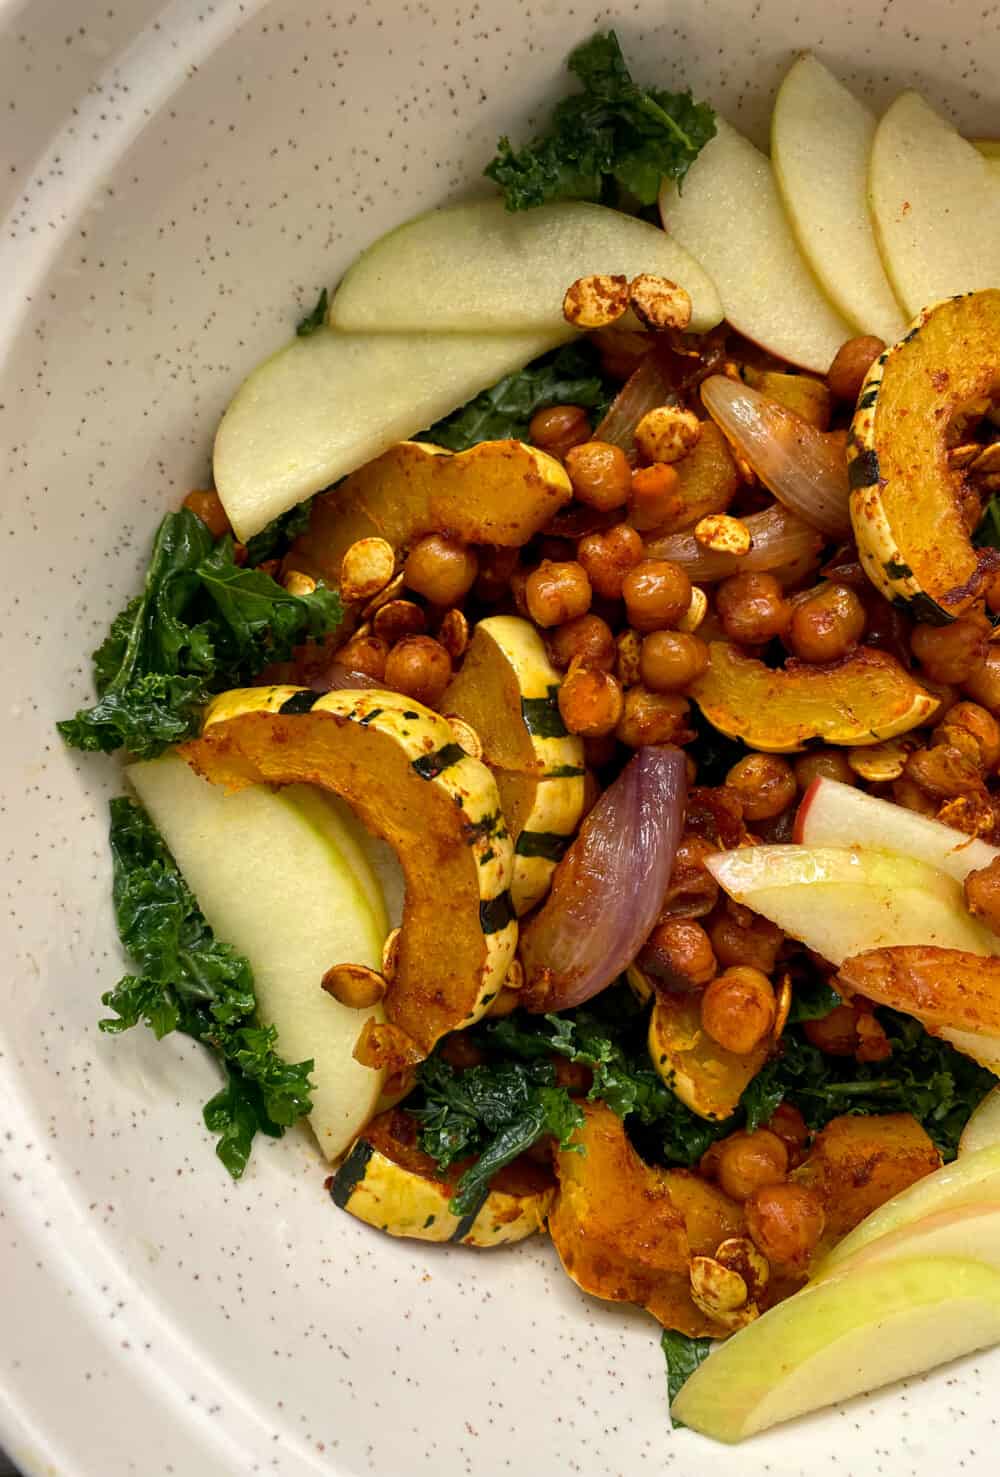 A big salad with kale, pickled apples, roasted delicata squash, smoky spiced chickpeas and creamy tahini-apple dressing.